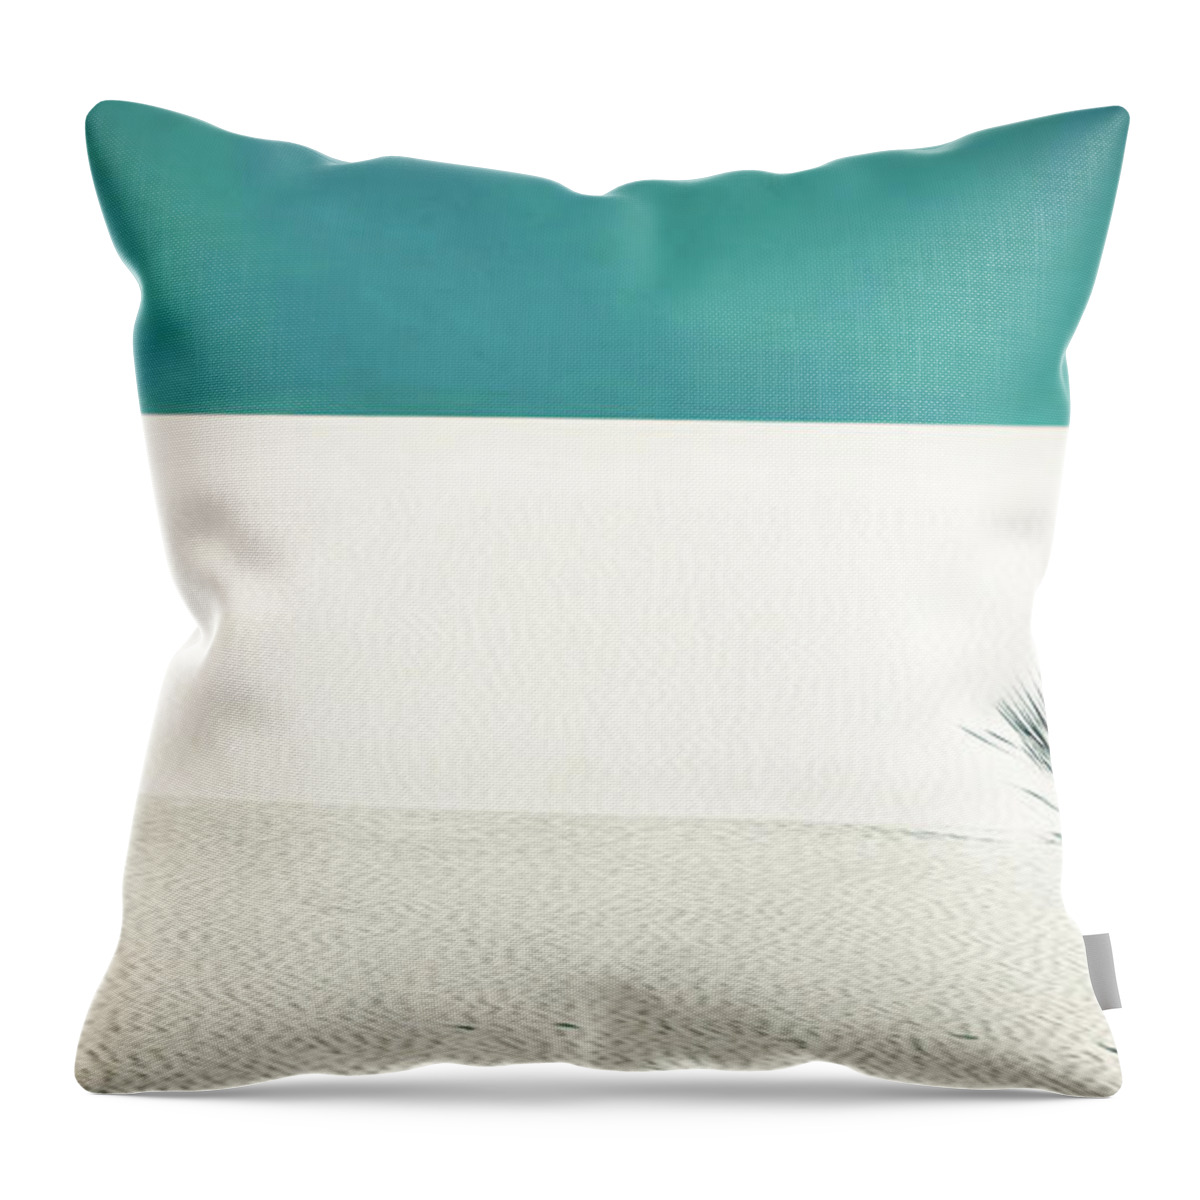 White Sands National Monument Throw Pillow featuring the photograph Teal Skies In White Sands by Doug Sturgess